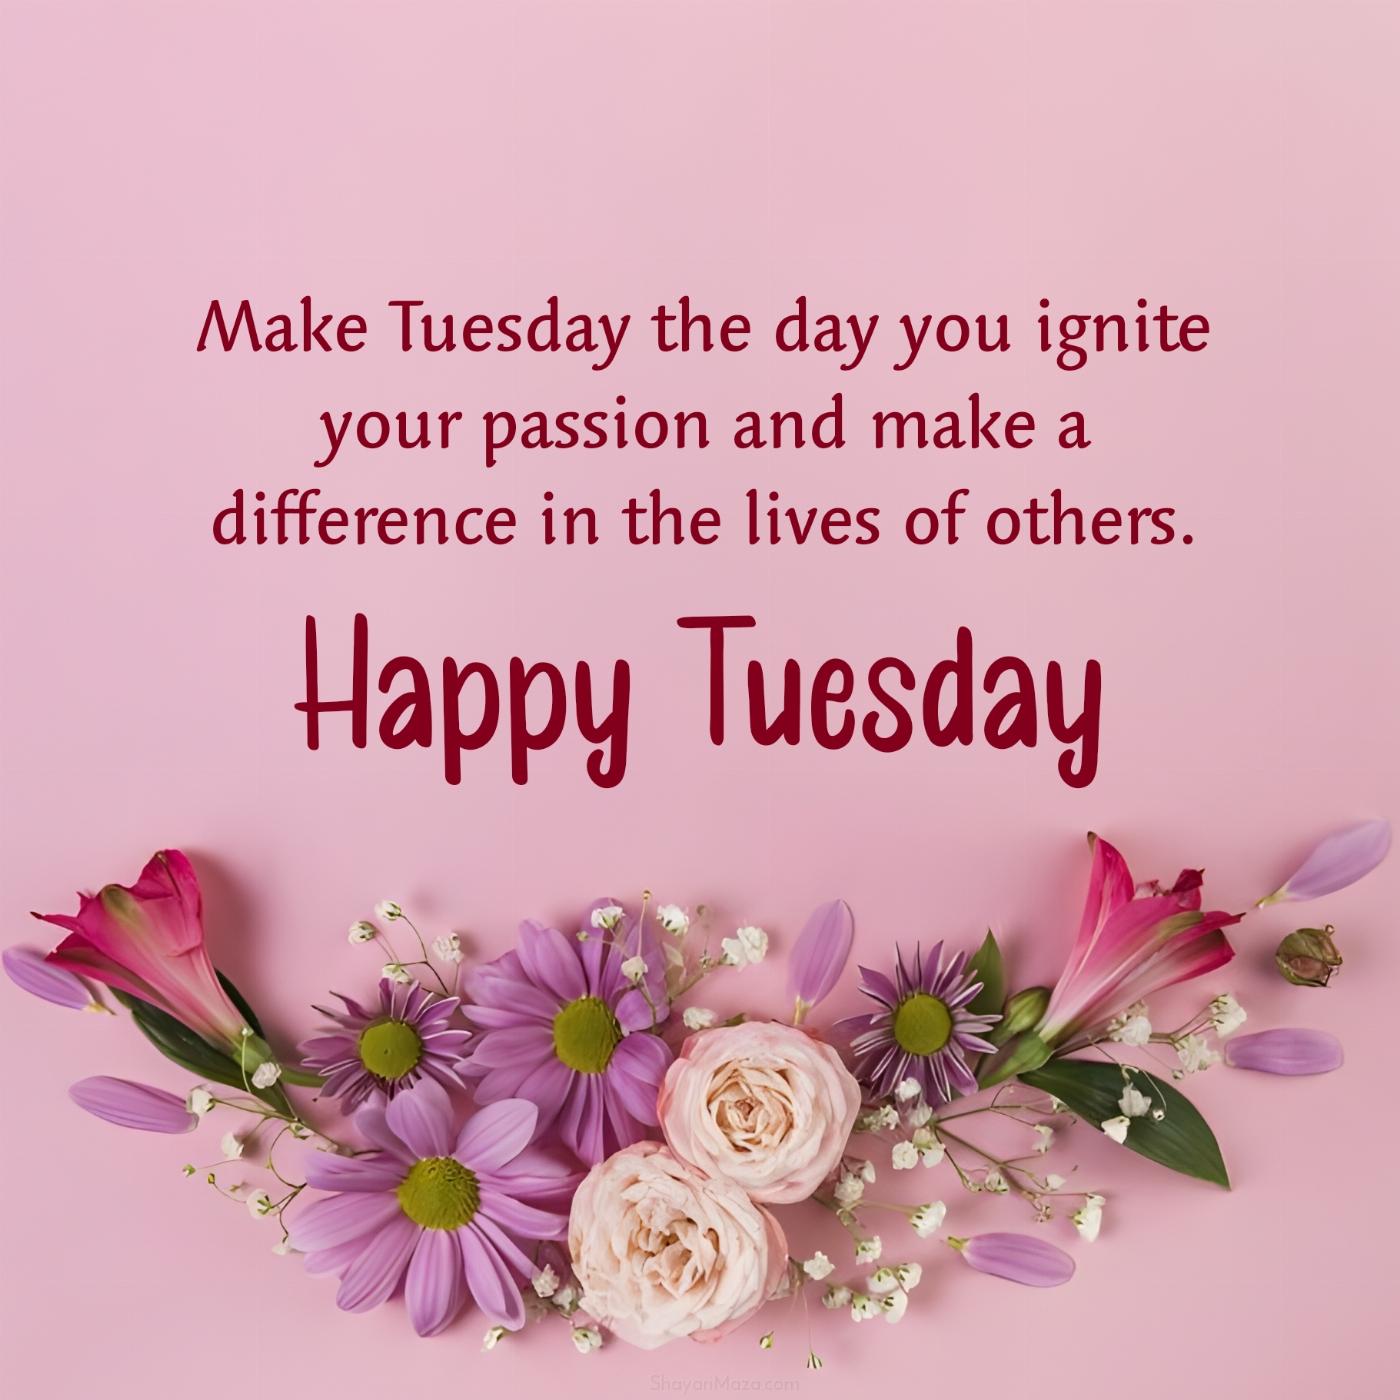 Make Tuesday the day you ignite your passion